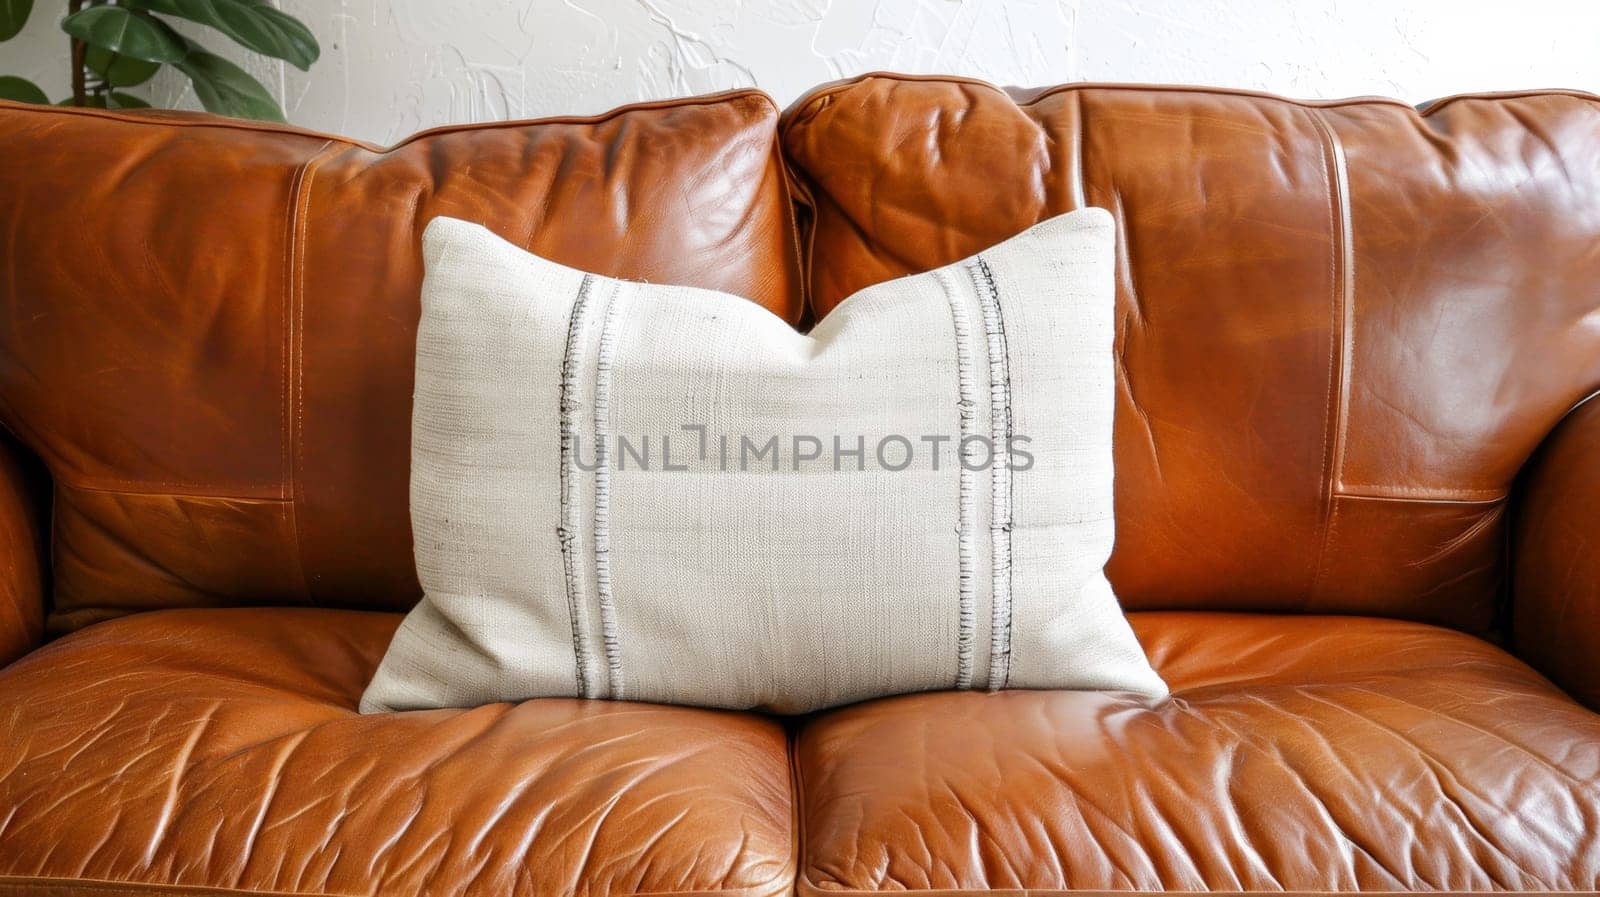 A close up of a brown leather couch with white pillows, AI by starush